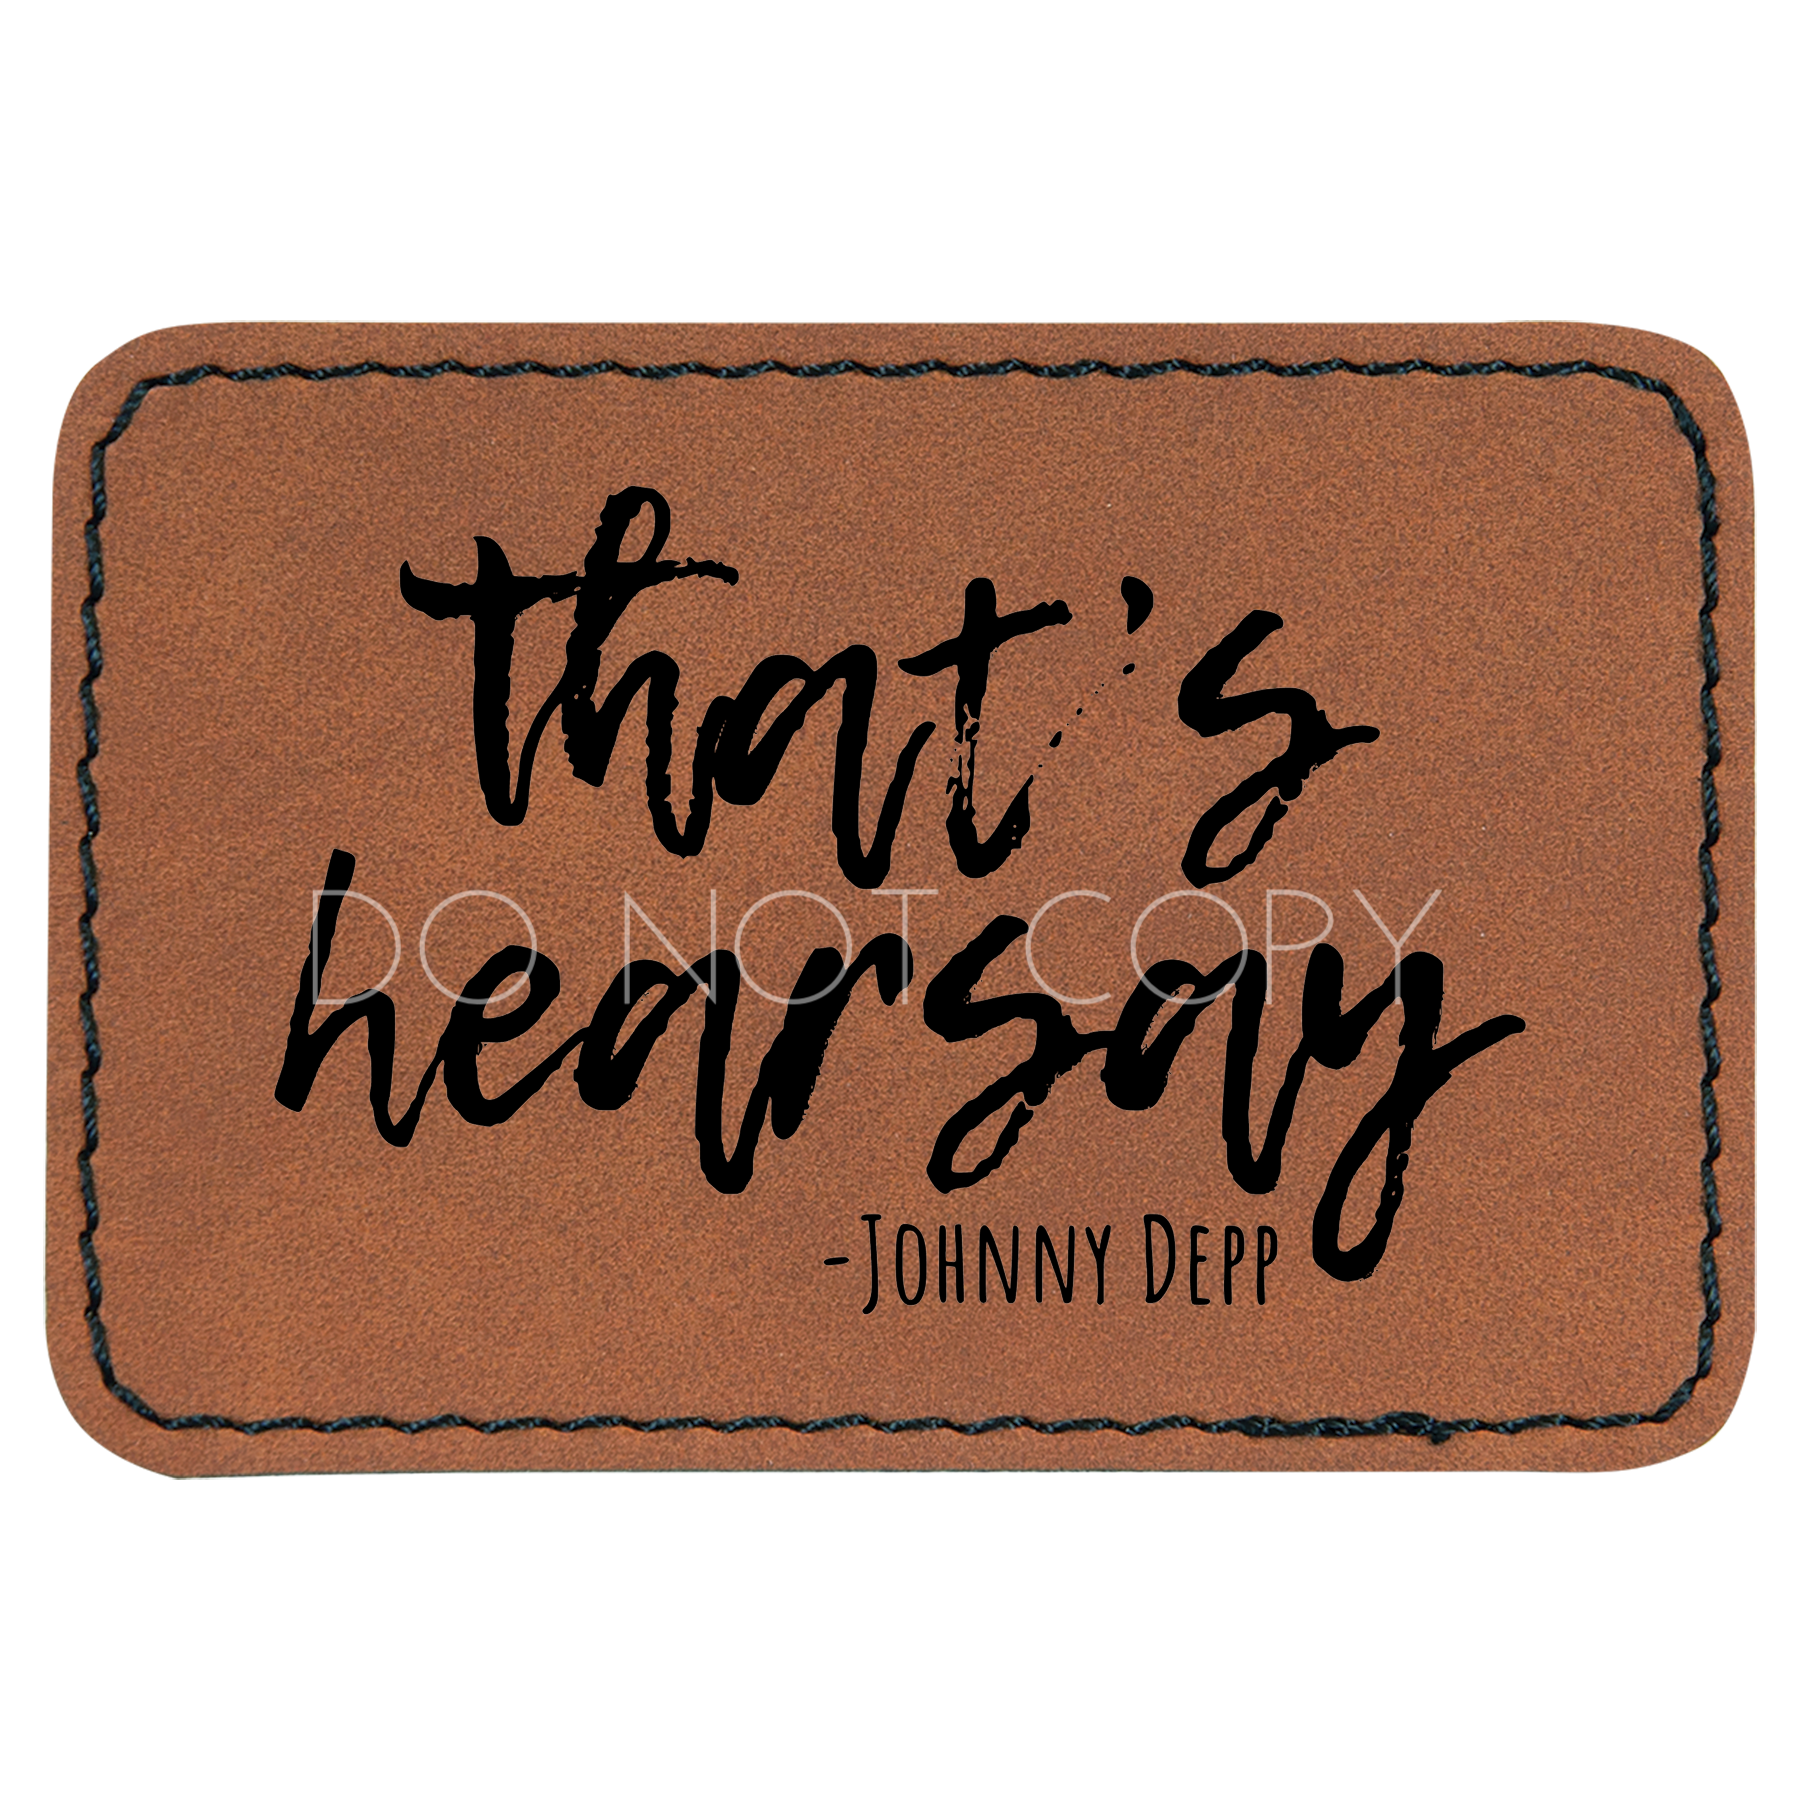 That's Hearsay Patch